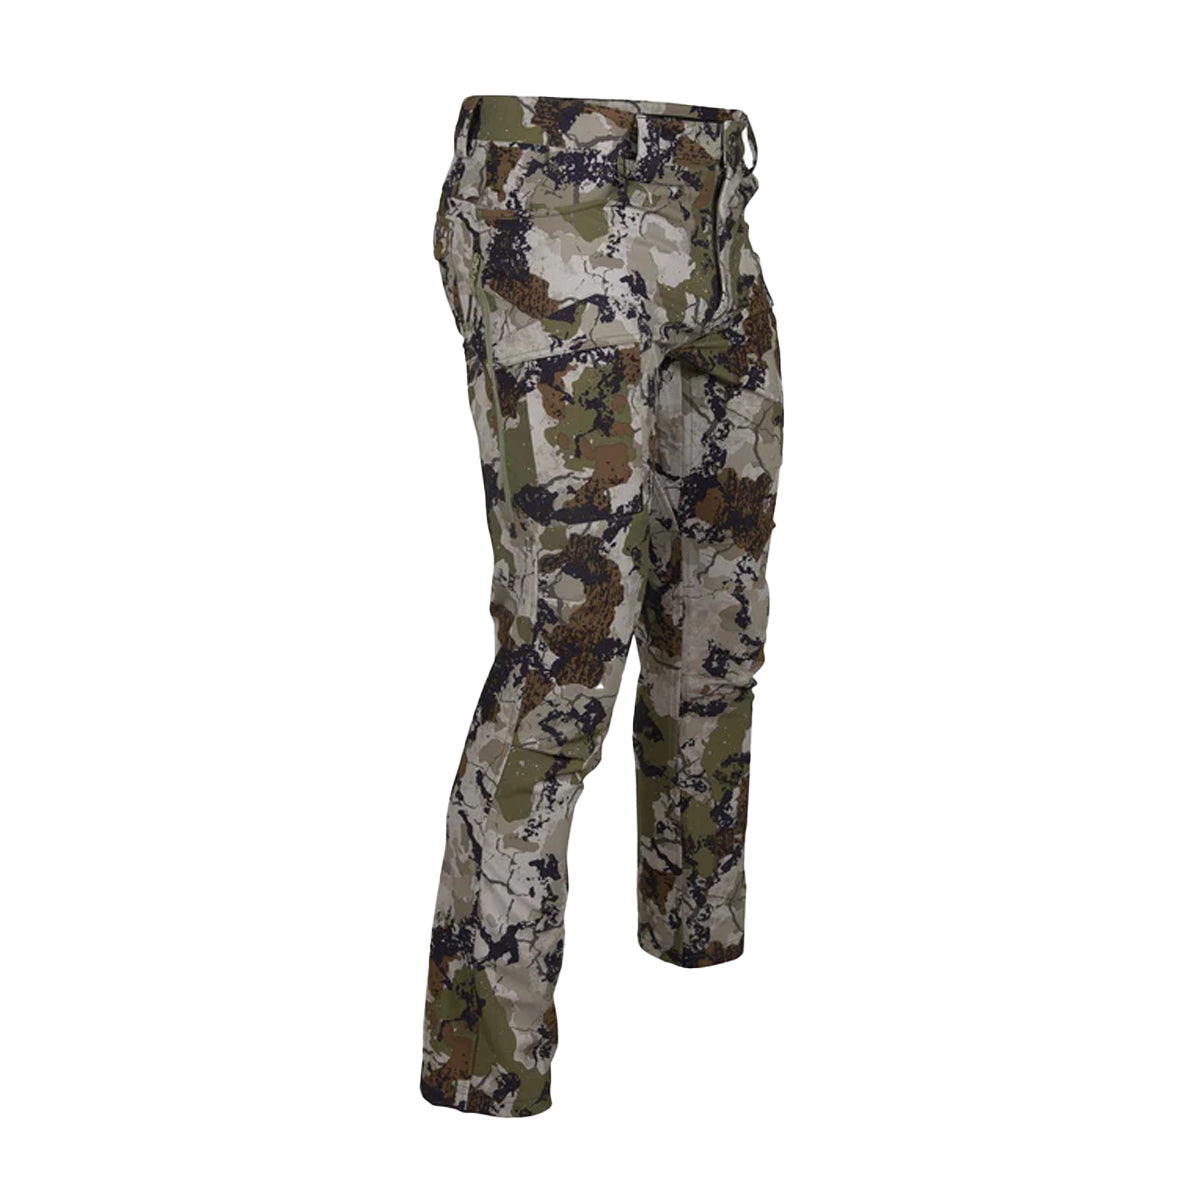 King's Draft Pant in XK7 by GOHUNT | King's - GOHUNT Shop